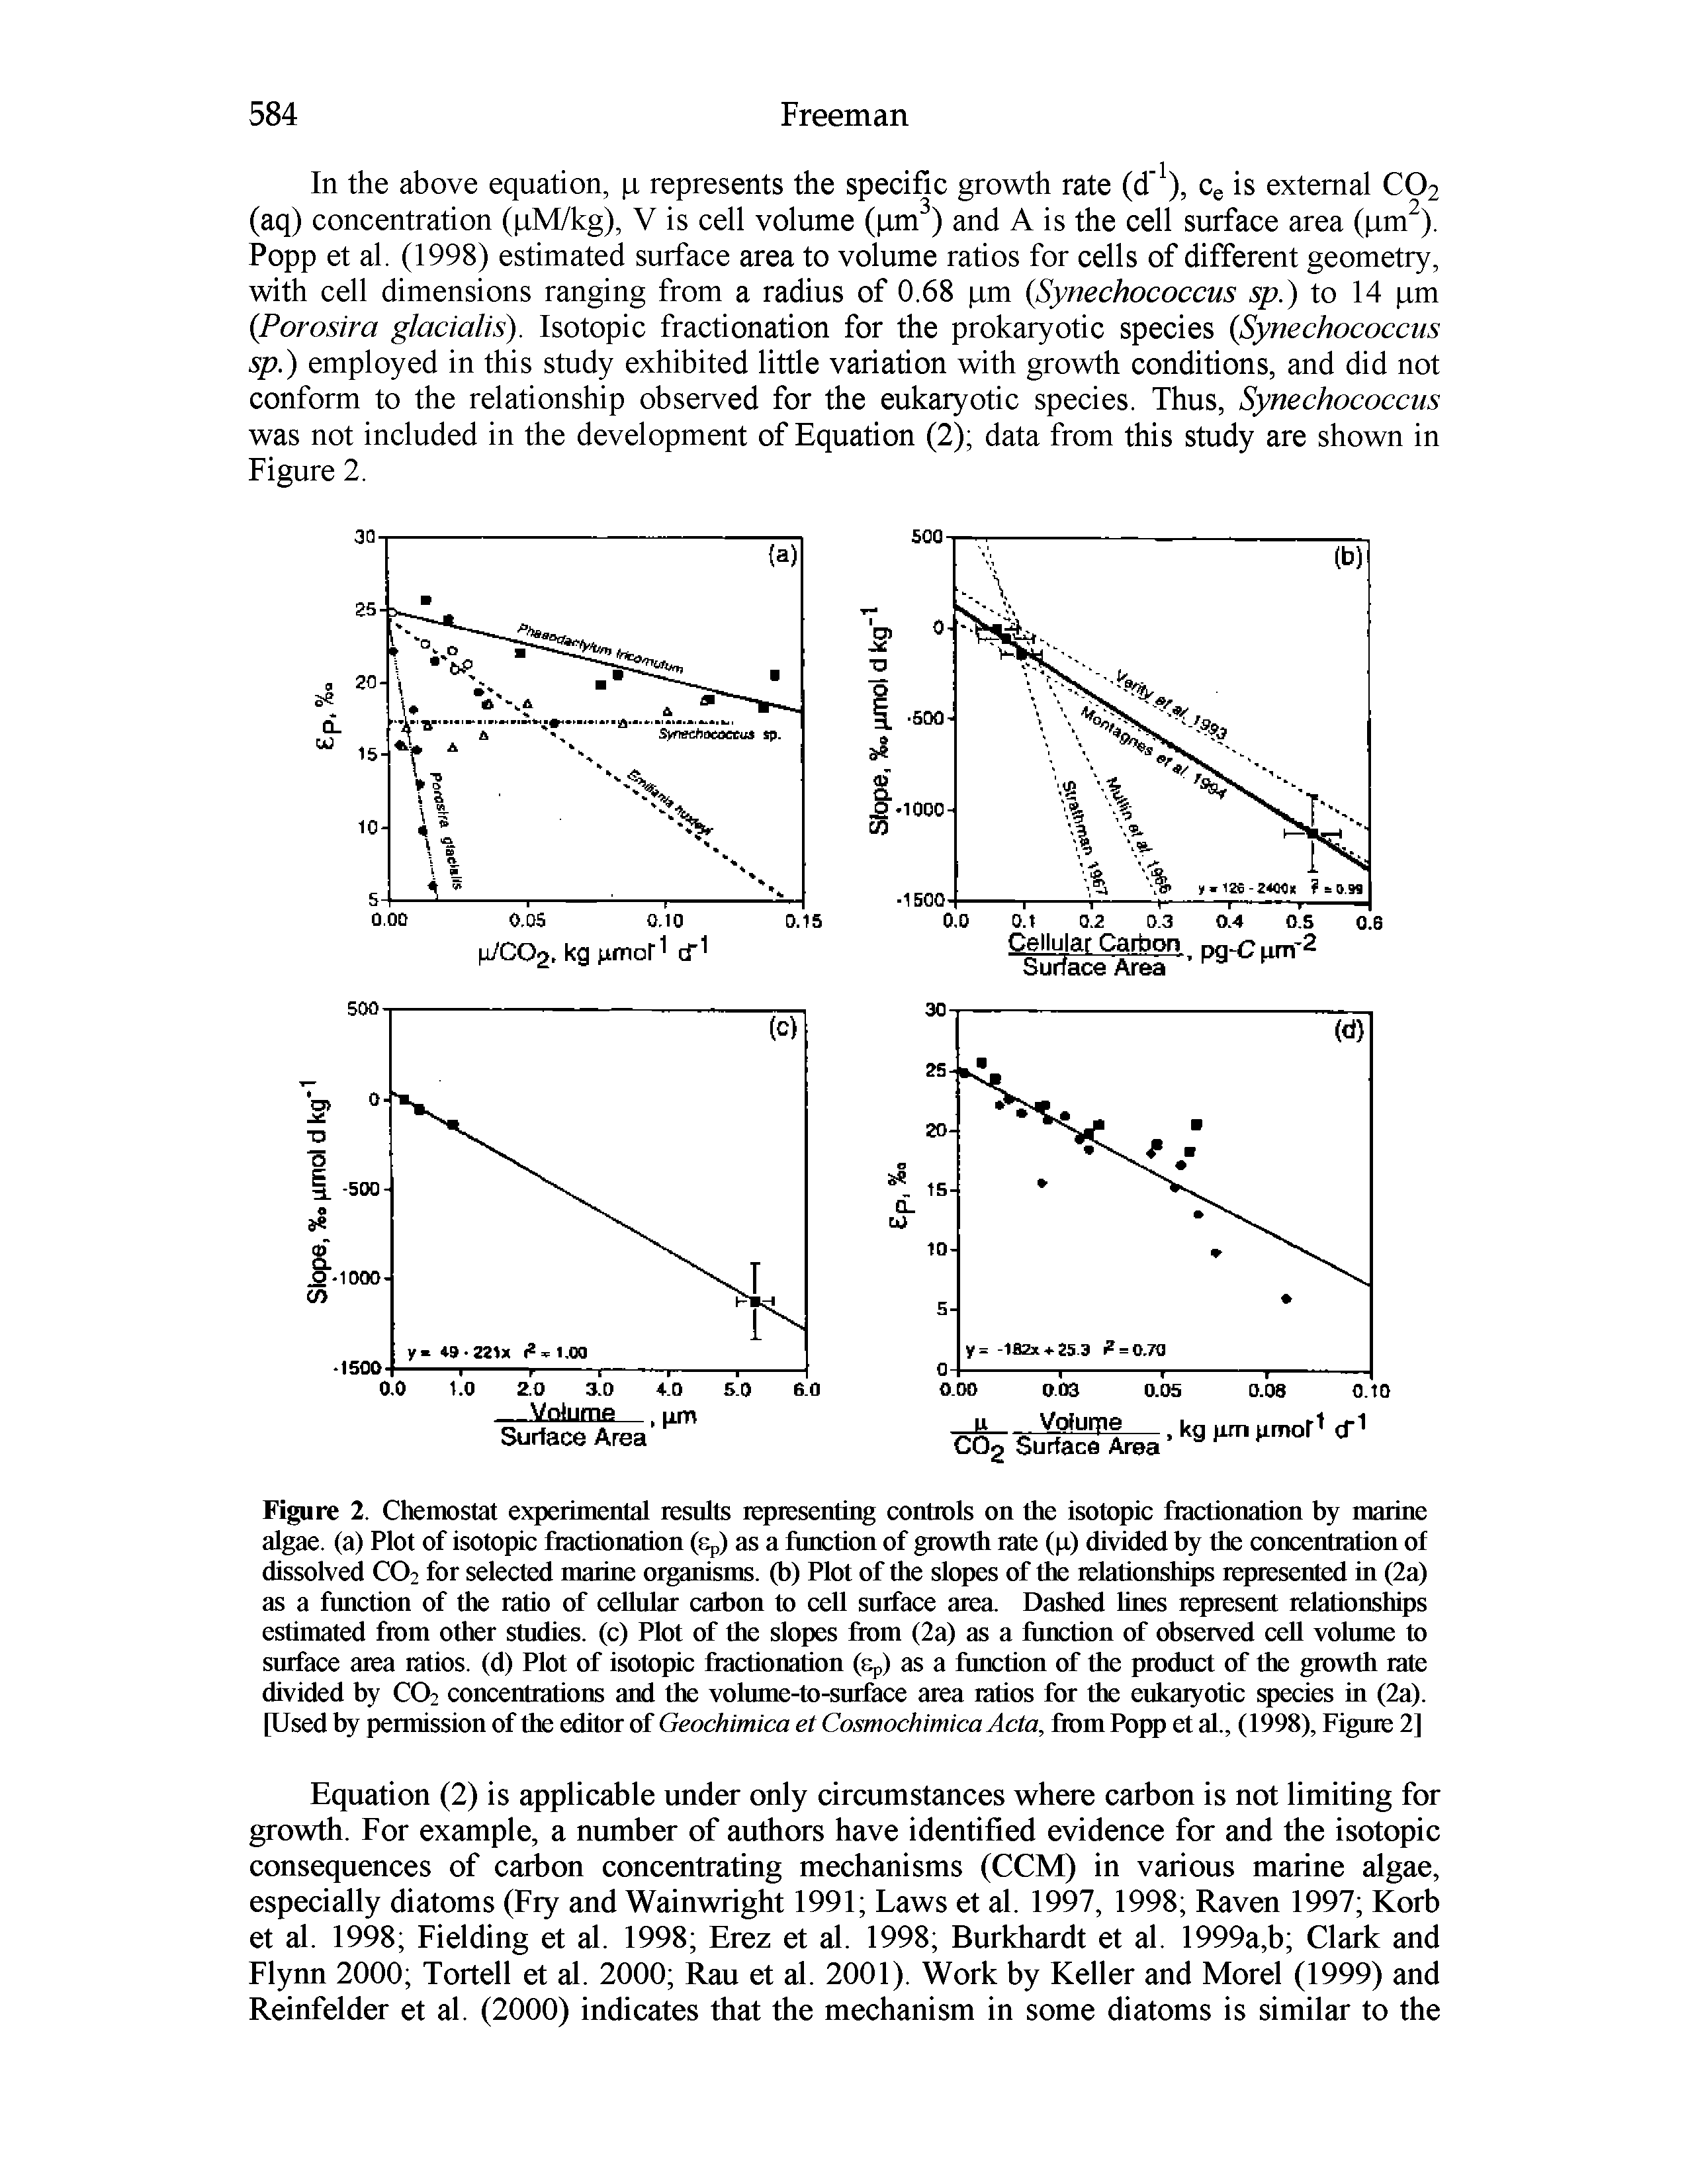 Figure 2. Chemostat experimental results representing controls on the isotopic fractionation by marine algae, (a) Plot of isotopic fractionation (Cp) as a function of growth rate (p) divided by the concentration of dissolved CO2 for selected marine organisms, (b) Plot of the slopes of the relationships represented in (2a) as a function of the ratio of cellular carbon to cell surface area. Dashed lines represent relationships estimated from other studies, (c) Plot of the slopes from (2a) as a function of observed cell volume to smface area ratios, (d) Plot of isotopic fractionation (Cp) as a function of the product of the growth rate divided by CO2 concentrations and the volmne-to-smface area ratios for the eukaryotic species in (2a). [Used by permission of the editor of Geochimica et Cosmochimica Acta, from Popp et al., (1998), Figirre 2]...